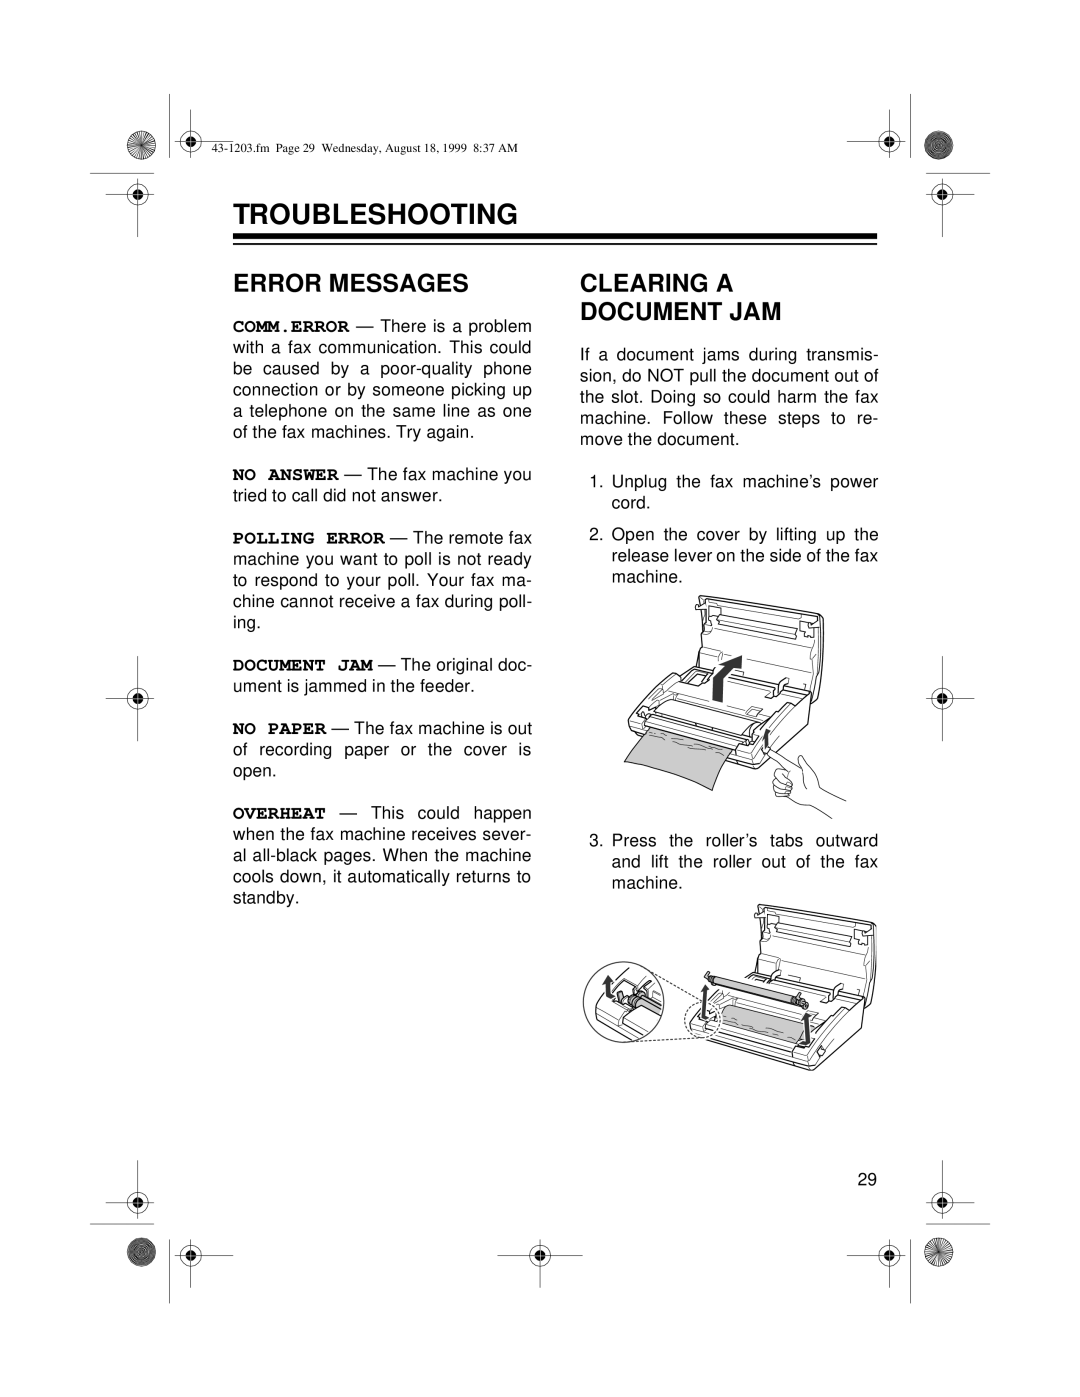 Radio Shack TFX-1031 owner manual Troubleshooting, Error Messages, Clearing A Document Jam 